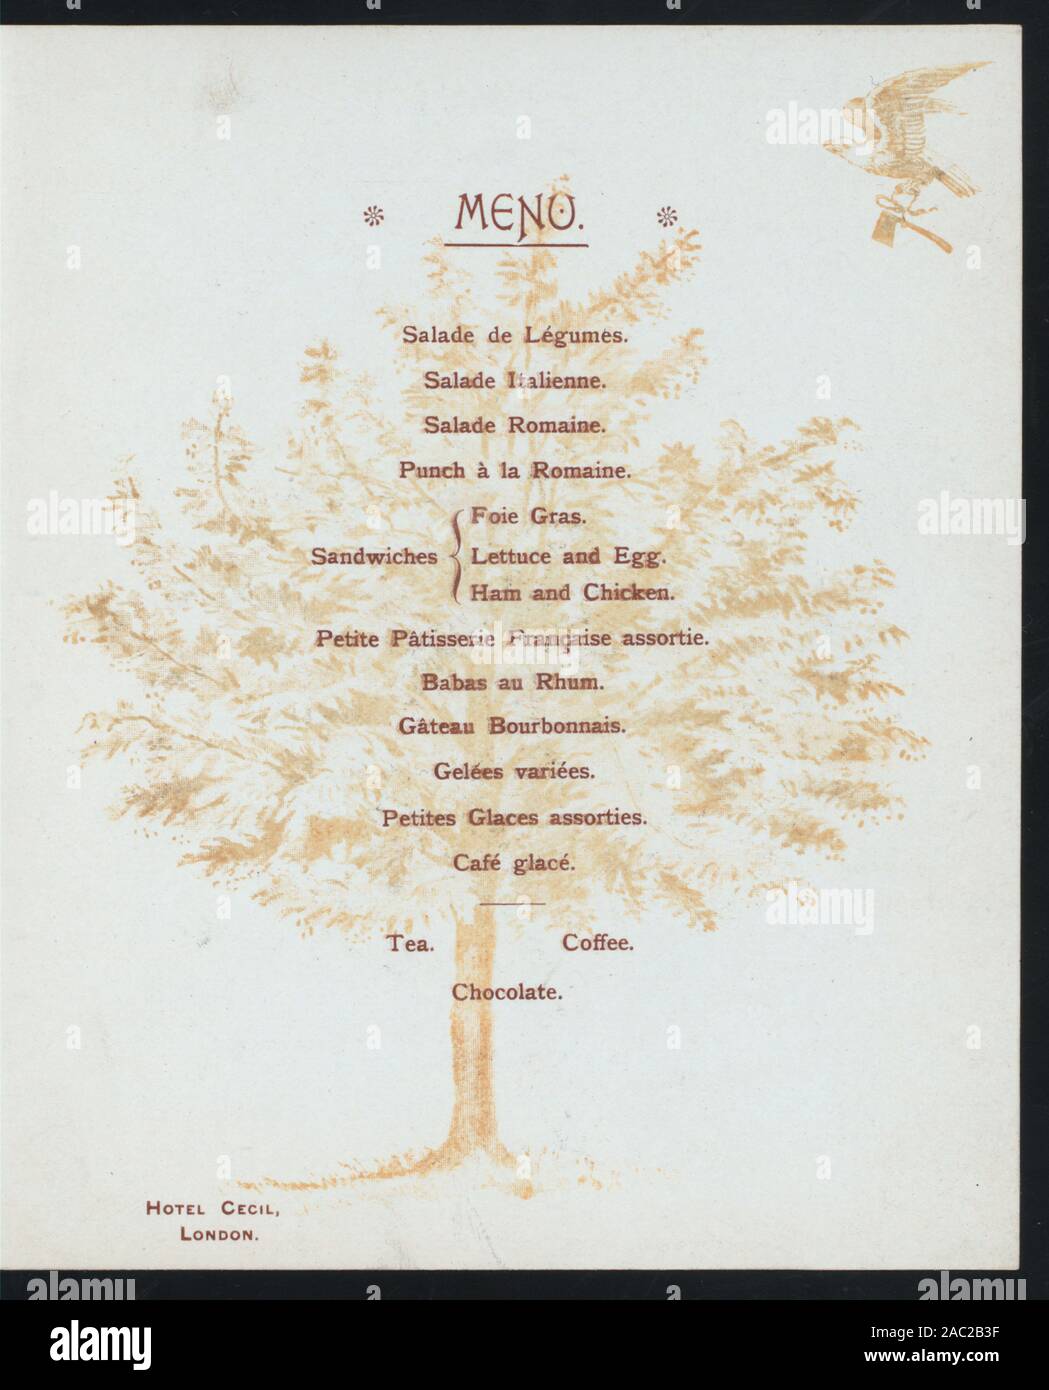 GEORGE WASHINGTON'S BIRTHDAY RECEPTION (held by) AMERICAN SOCIETY IN LONDON (at) HOTEL CECIL, LONDON (FOR;) PORTRAIT OF WASHINGTON; EAGLE; MENU MOSTLY FRENCH; GEORGE WASHINGTON'S BIRTHDAY RECEPTION [held by] AMERICAN SOCIETY IN LONDON [at] HOTEL CECIL, LONDON (FOR;) Stock Photo